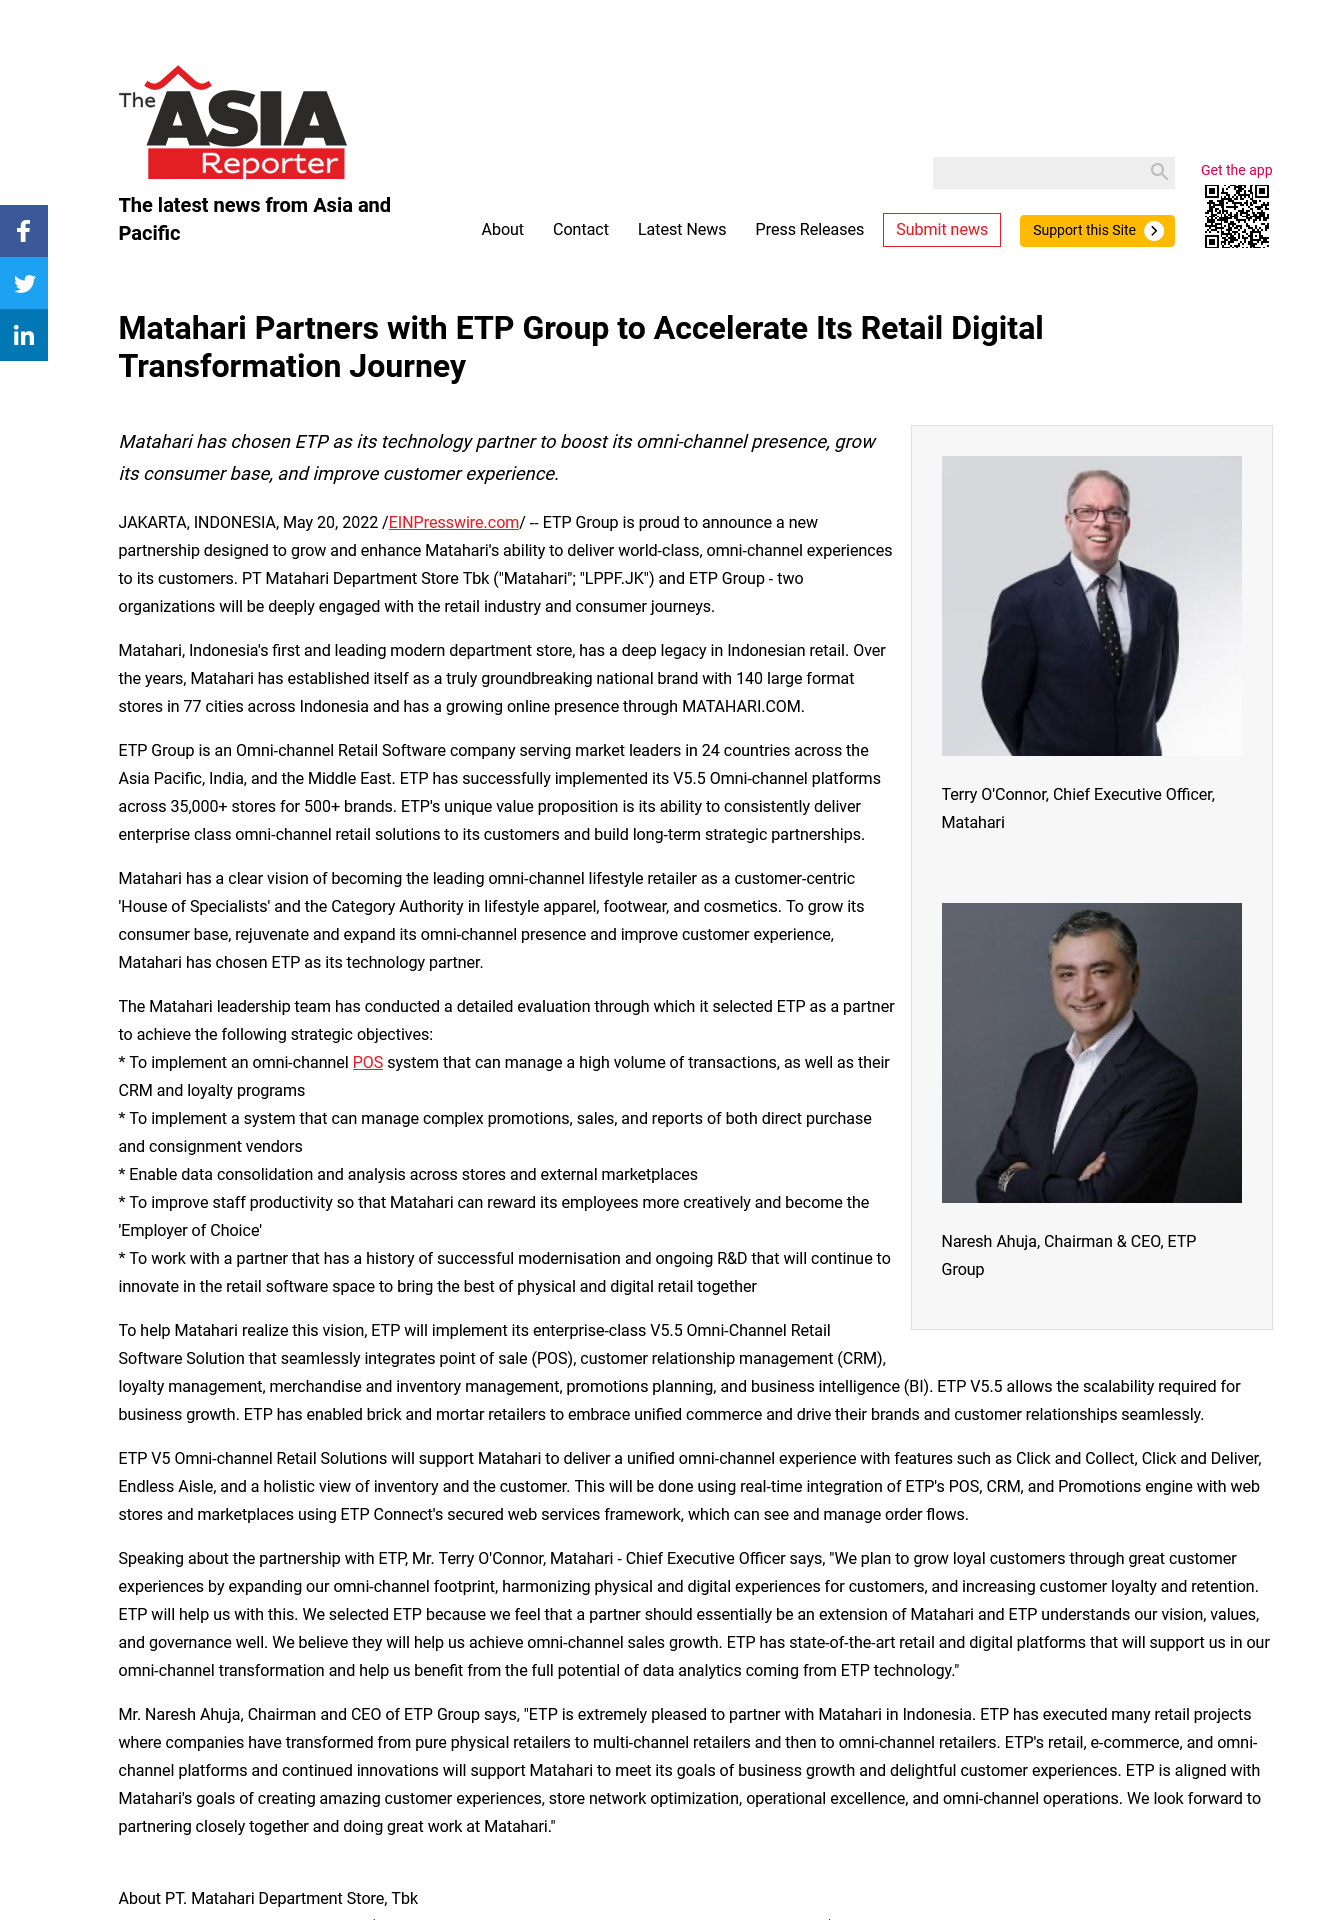 The Asia Reporter: Matahari Partners with ETP Group to Accelerate Its Retail Digital Transformation Journey